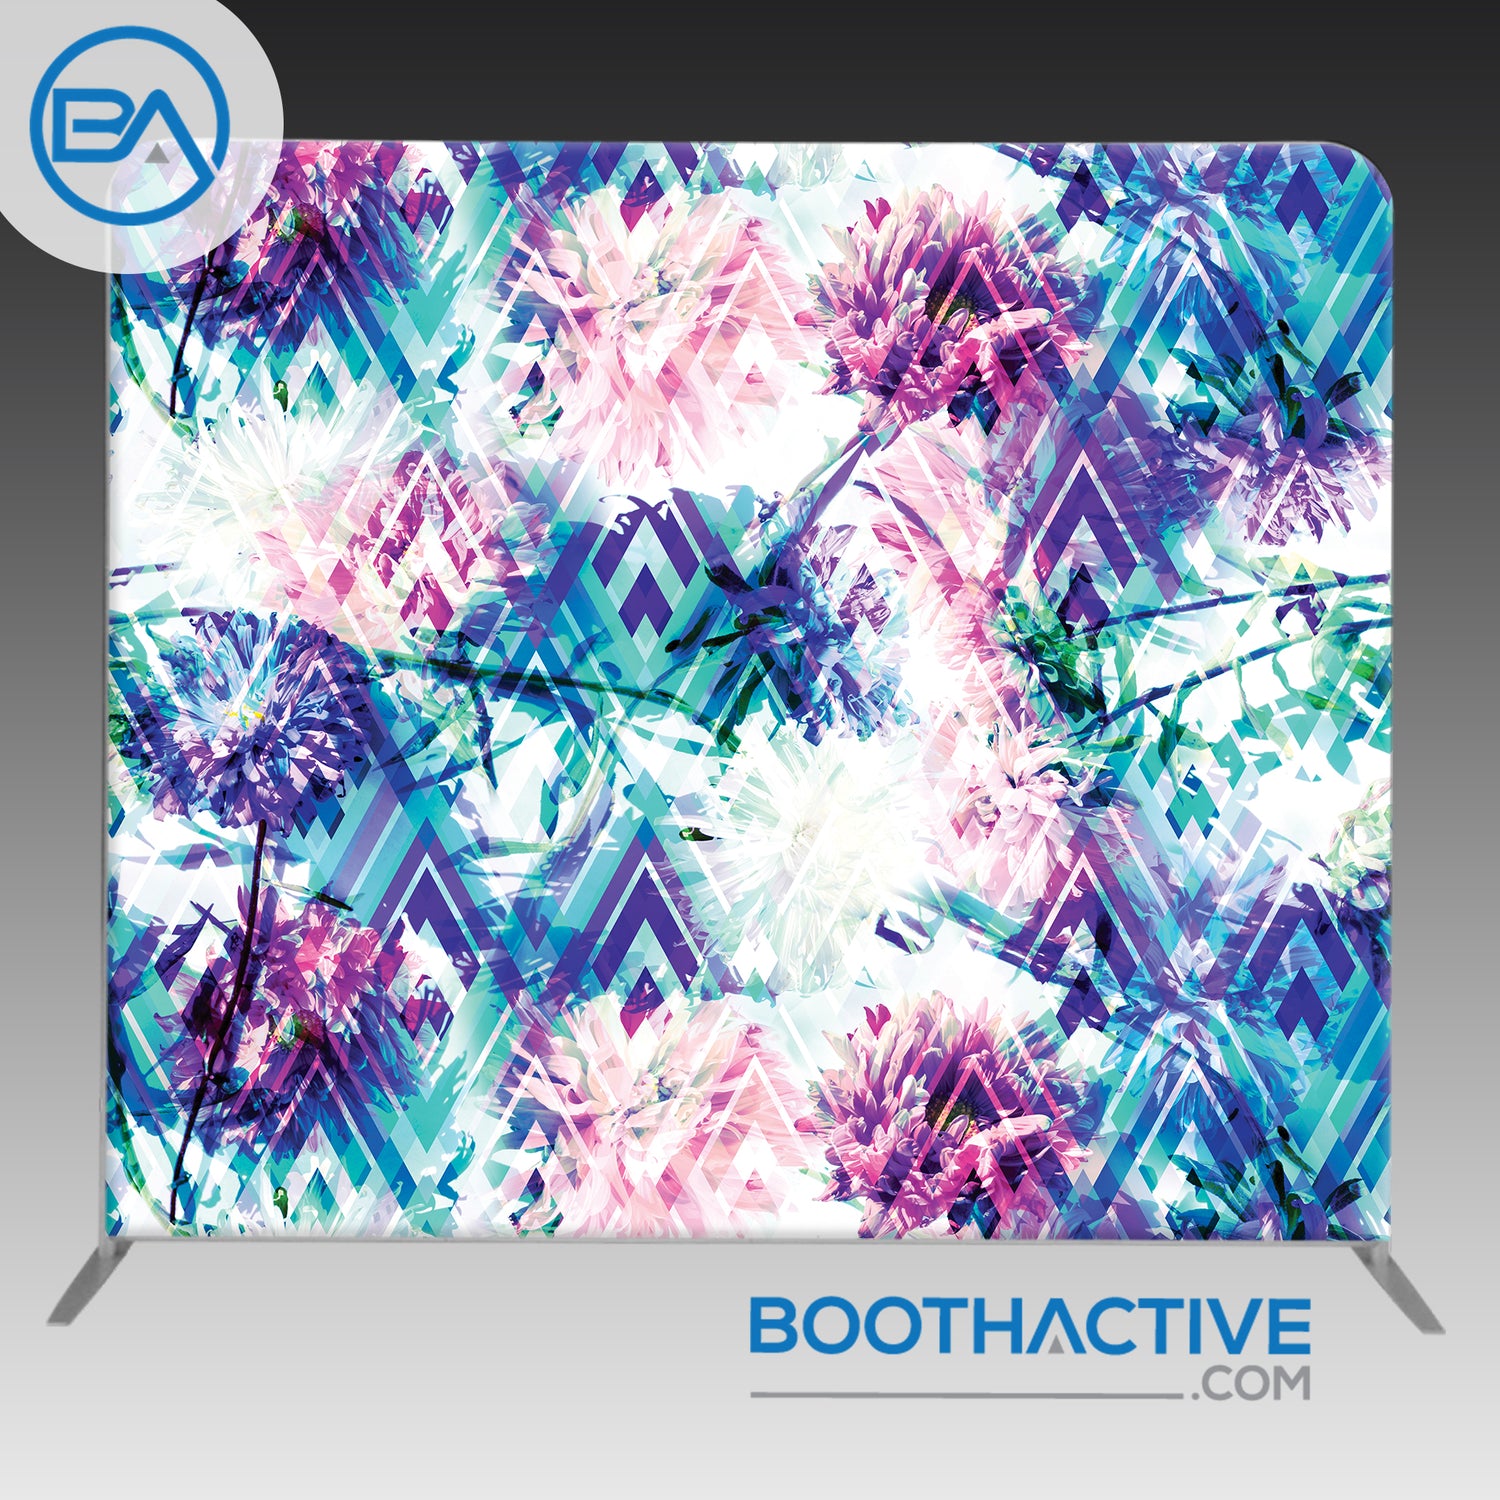 8' x 8' Backdrop - Geometric - Floral - BoothActive